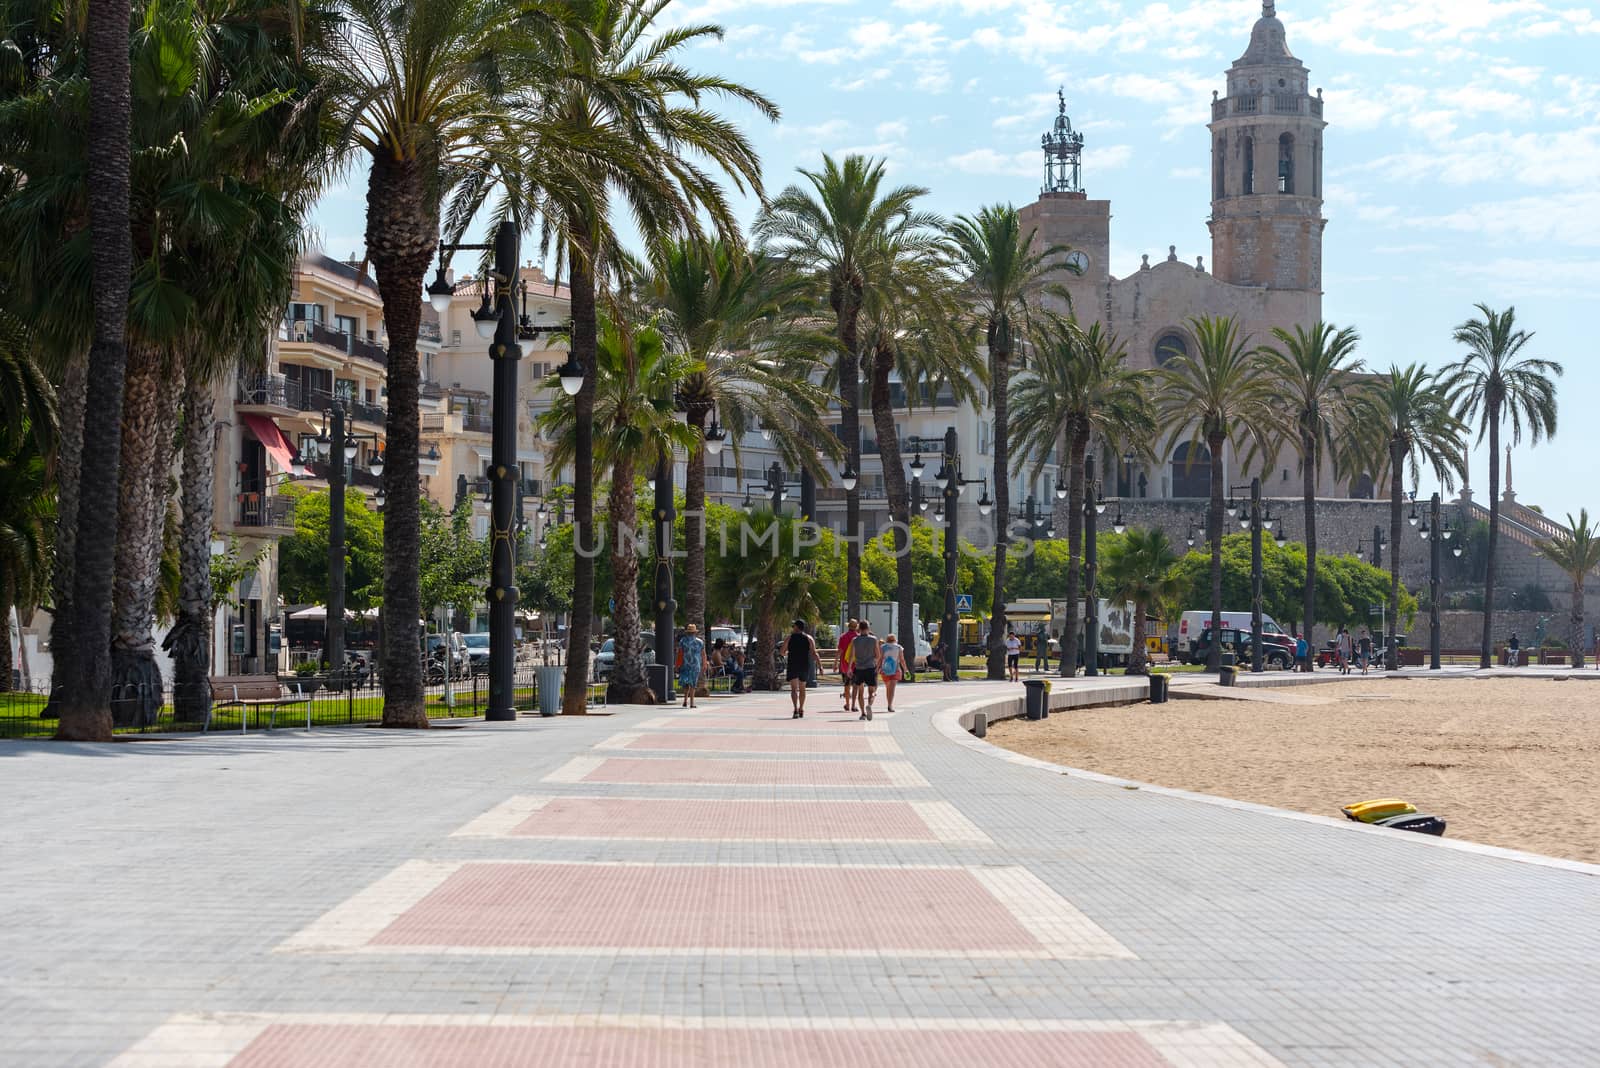 Sitges, Catalonia, Spain: July 28, 2020: People on the Paseo Maritimo in the city of Sitges in the summer of 2020.